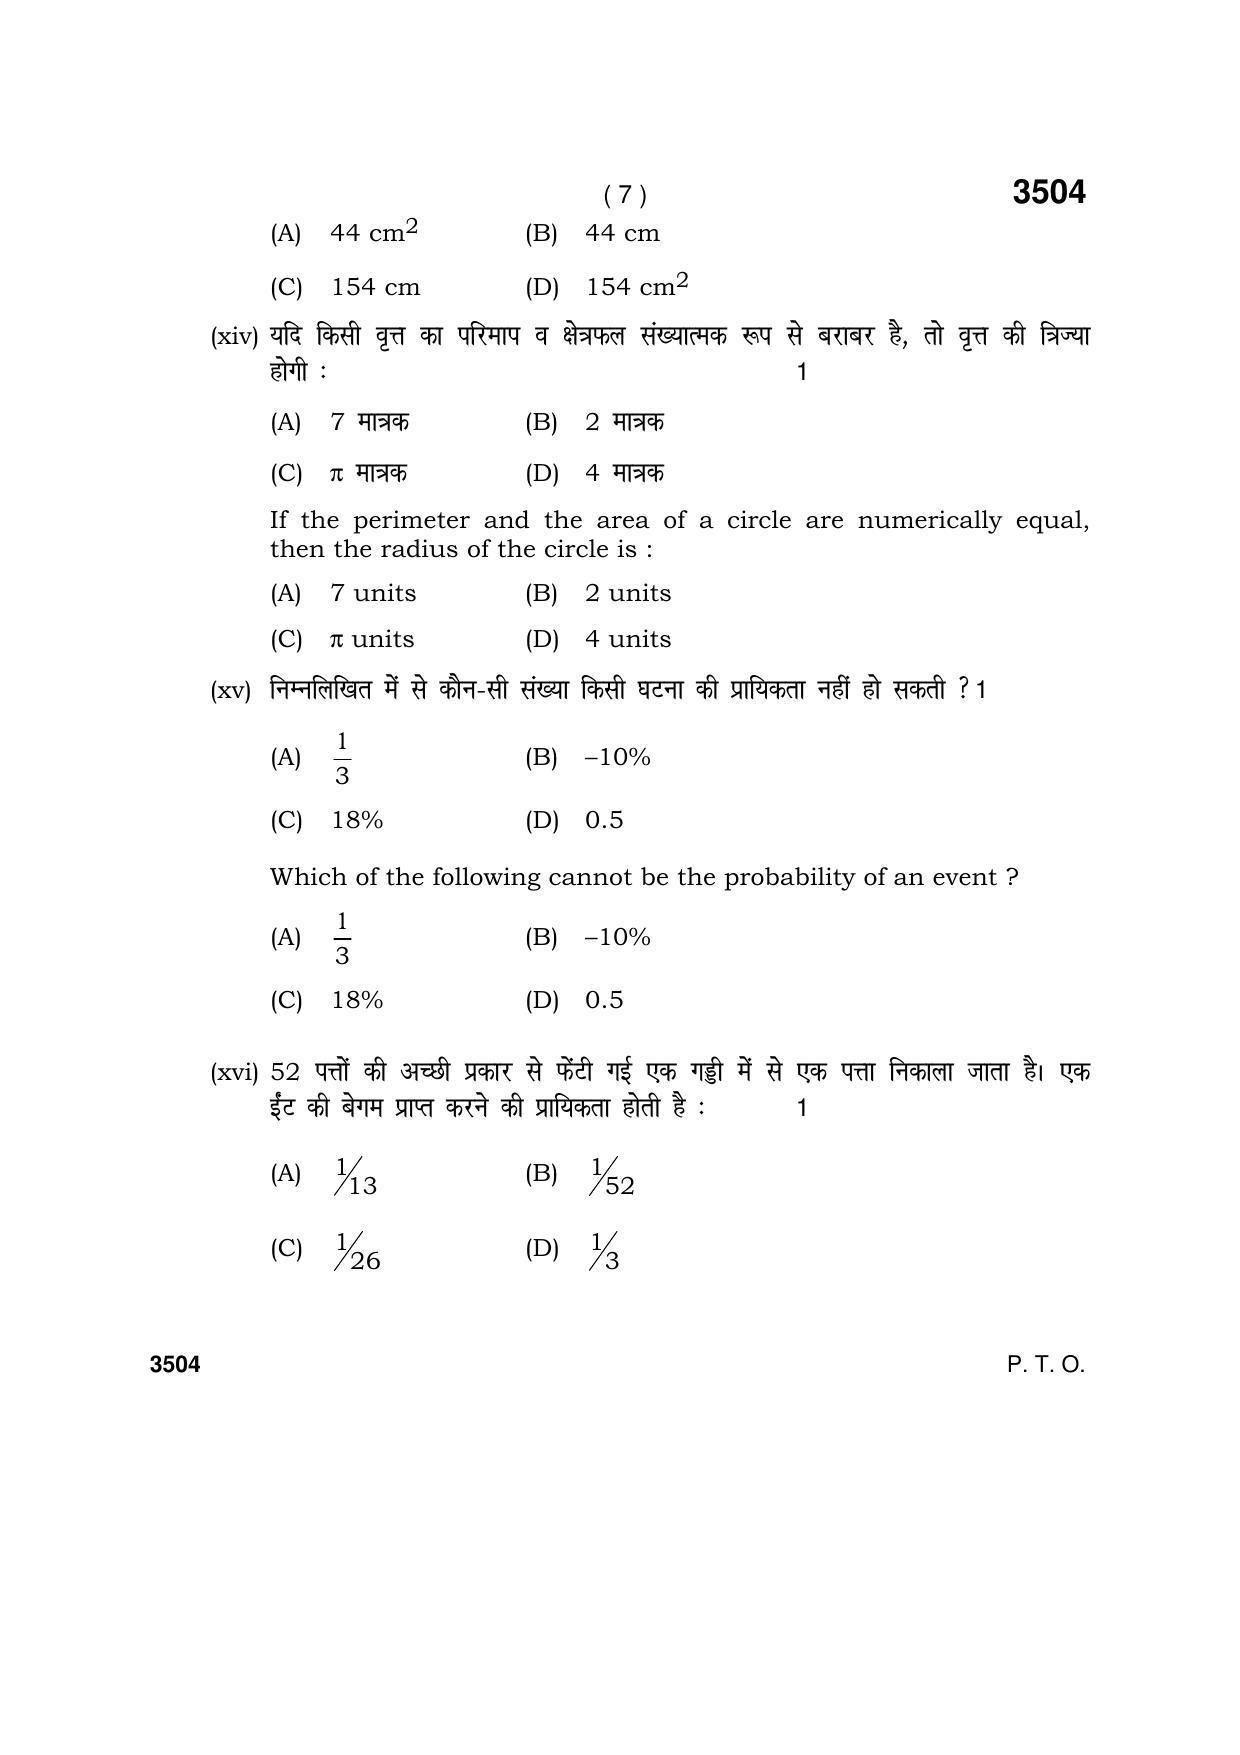 Haryana Board HBSE Class 10 Mathematics (Blind c) 2018 Question Paper - Page 7